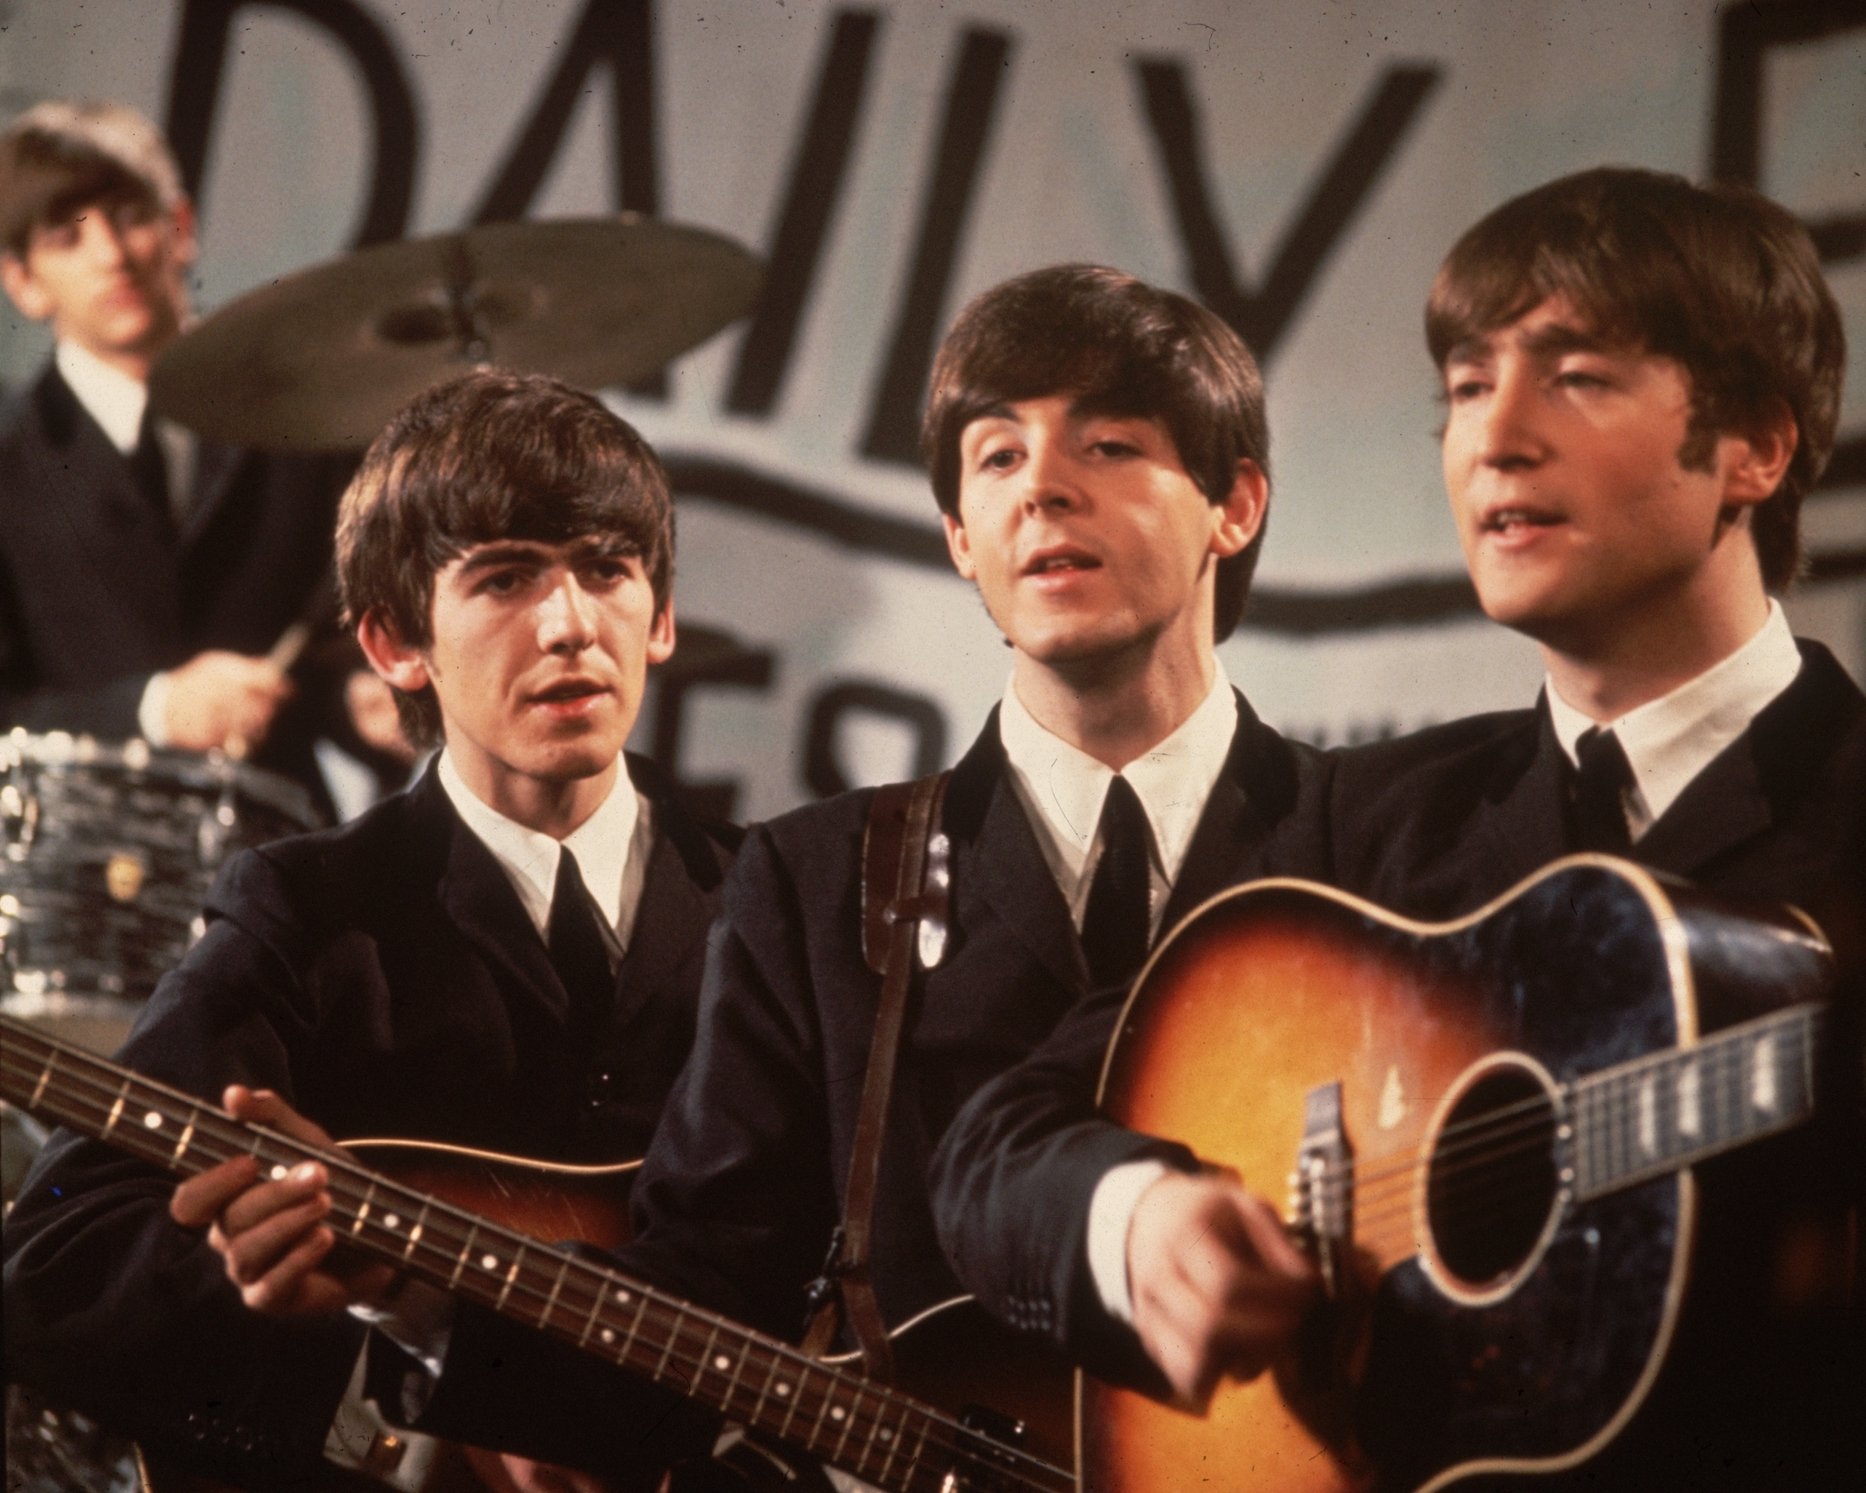  A group shot of the Beatles, Ringo Starr (in the background), George Harrison, Paul McCartney and John Lennon, pictured during a performance on Granada TV's Late Scene Extra television show filmed in Manchester, England 